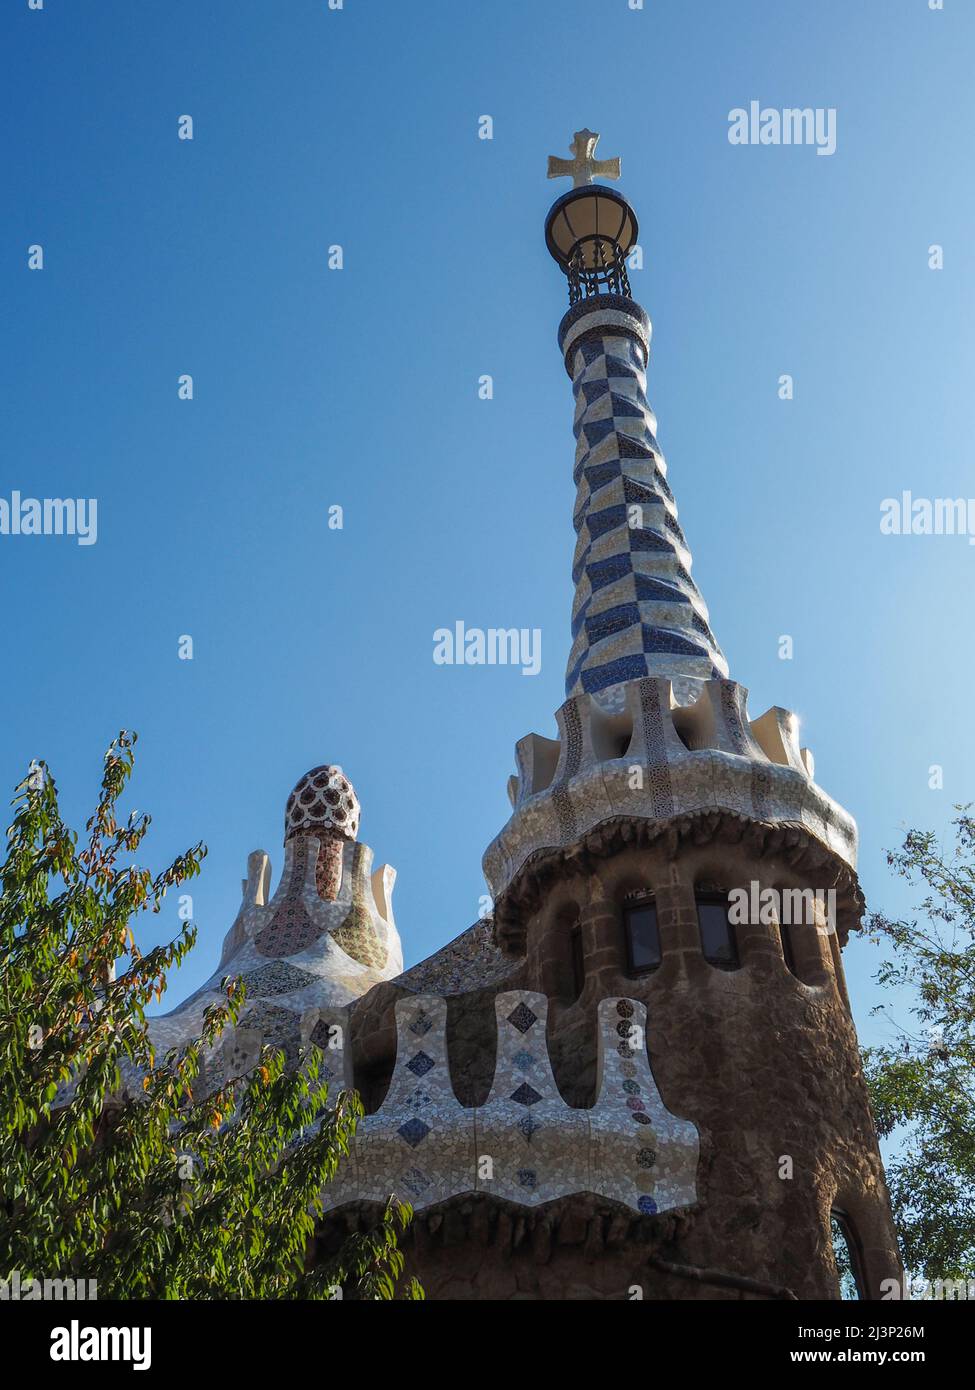 Parc Güell Garden complex with architectural elements  Designed by the Catalan architect Antoni Gaudí, Spain, Europe Stock Photo